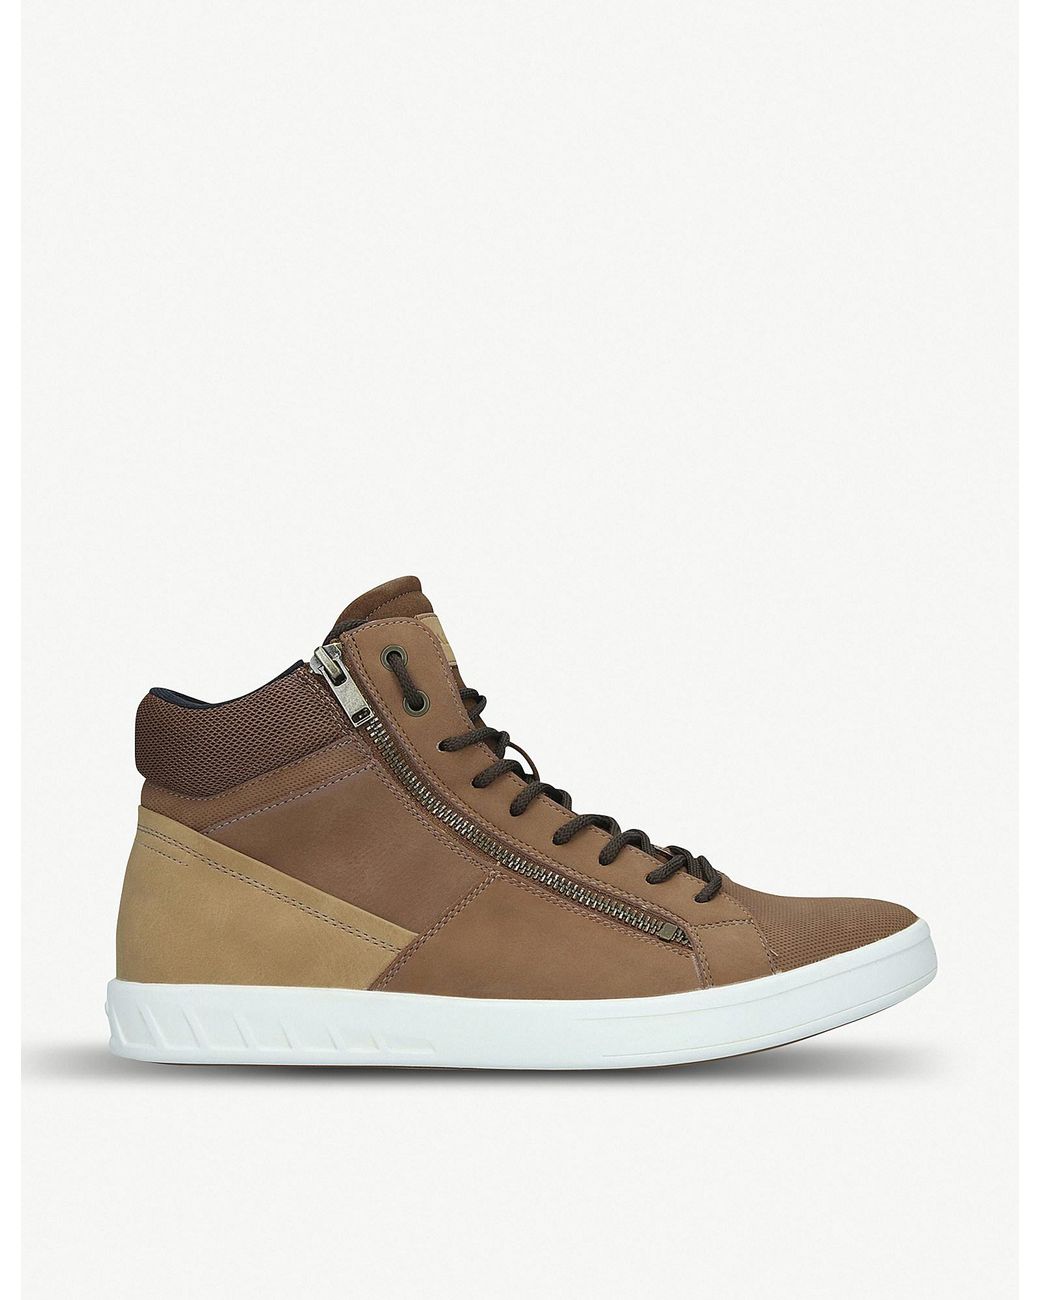 Lyst - ALDO Peohtric Mid-top Trainers in Brown for Men